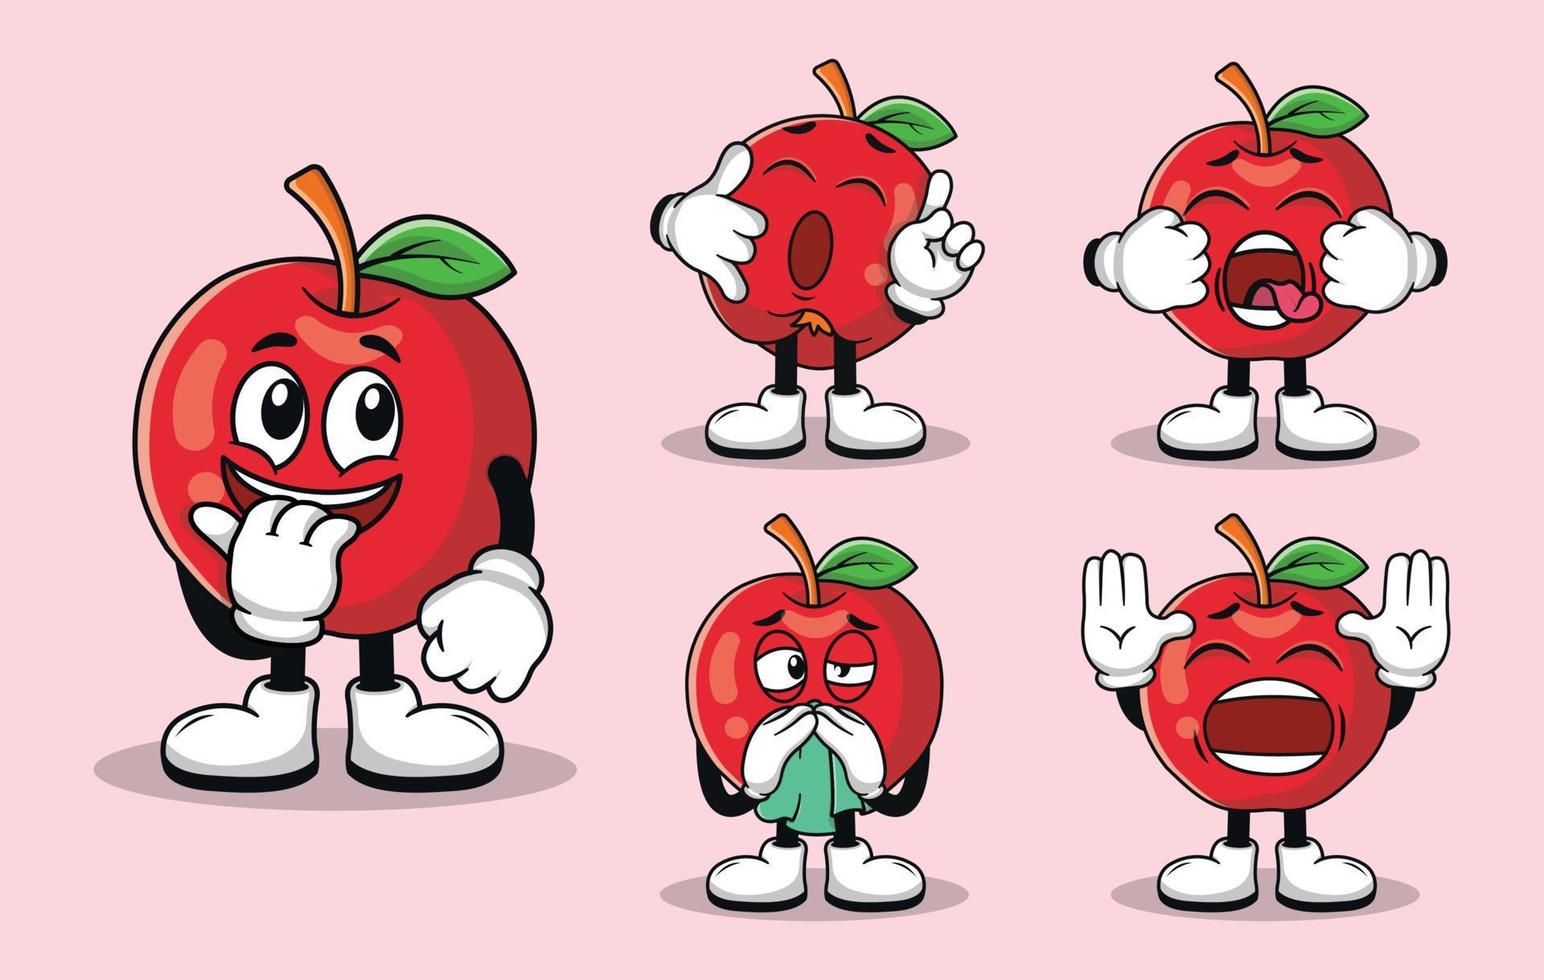 Cute apple fruit mascot with various kinds of expressions set collection vector